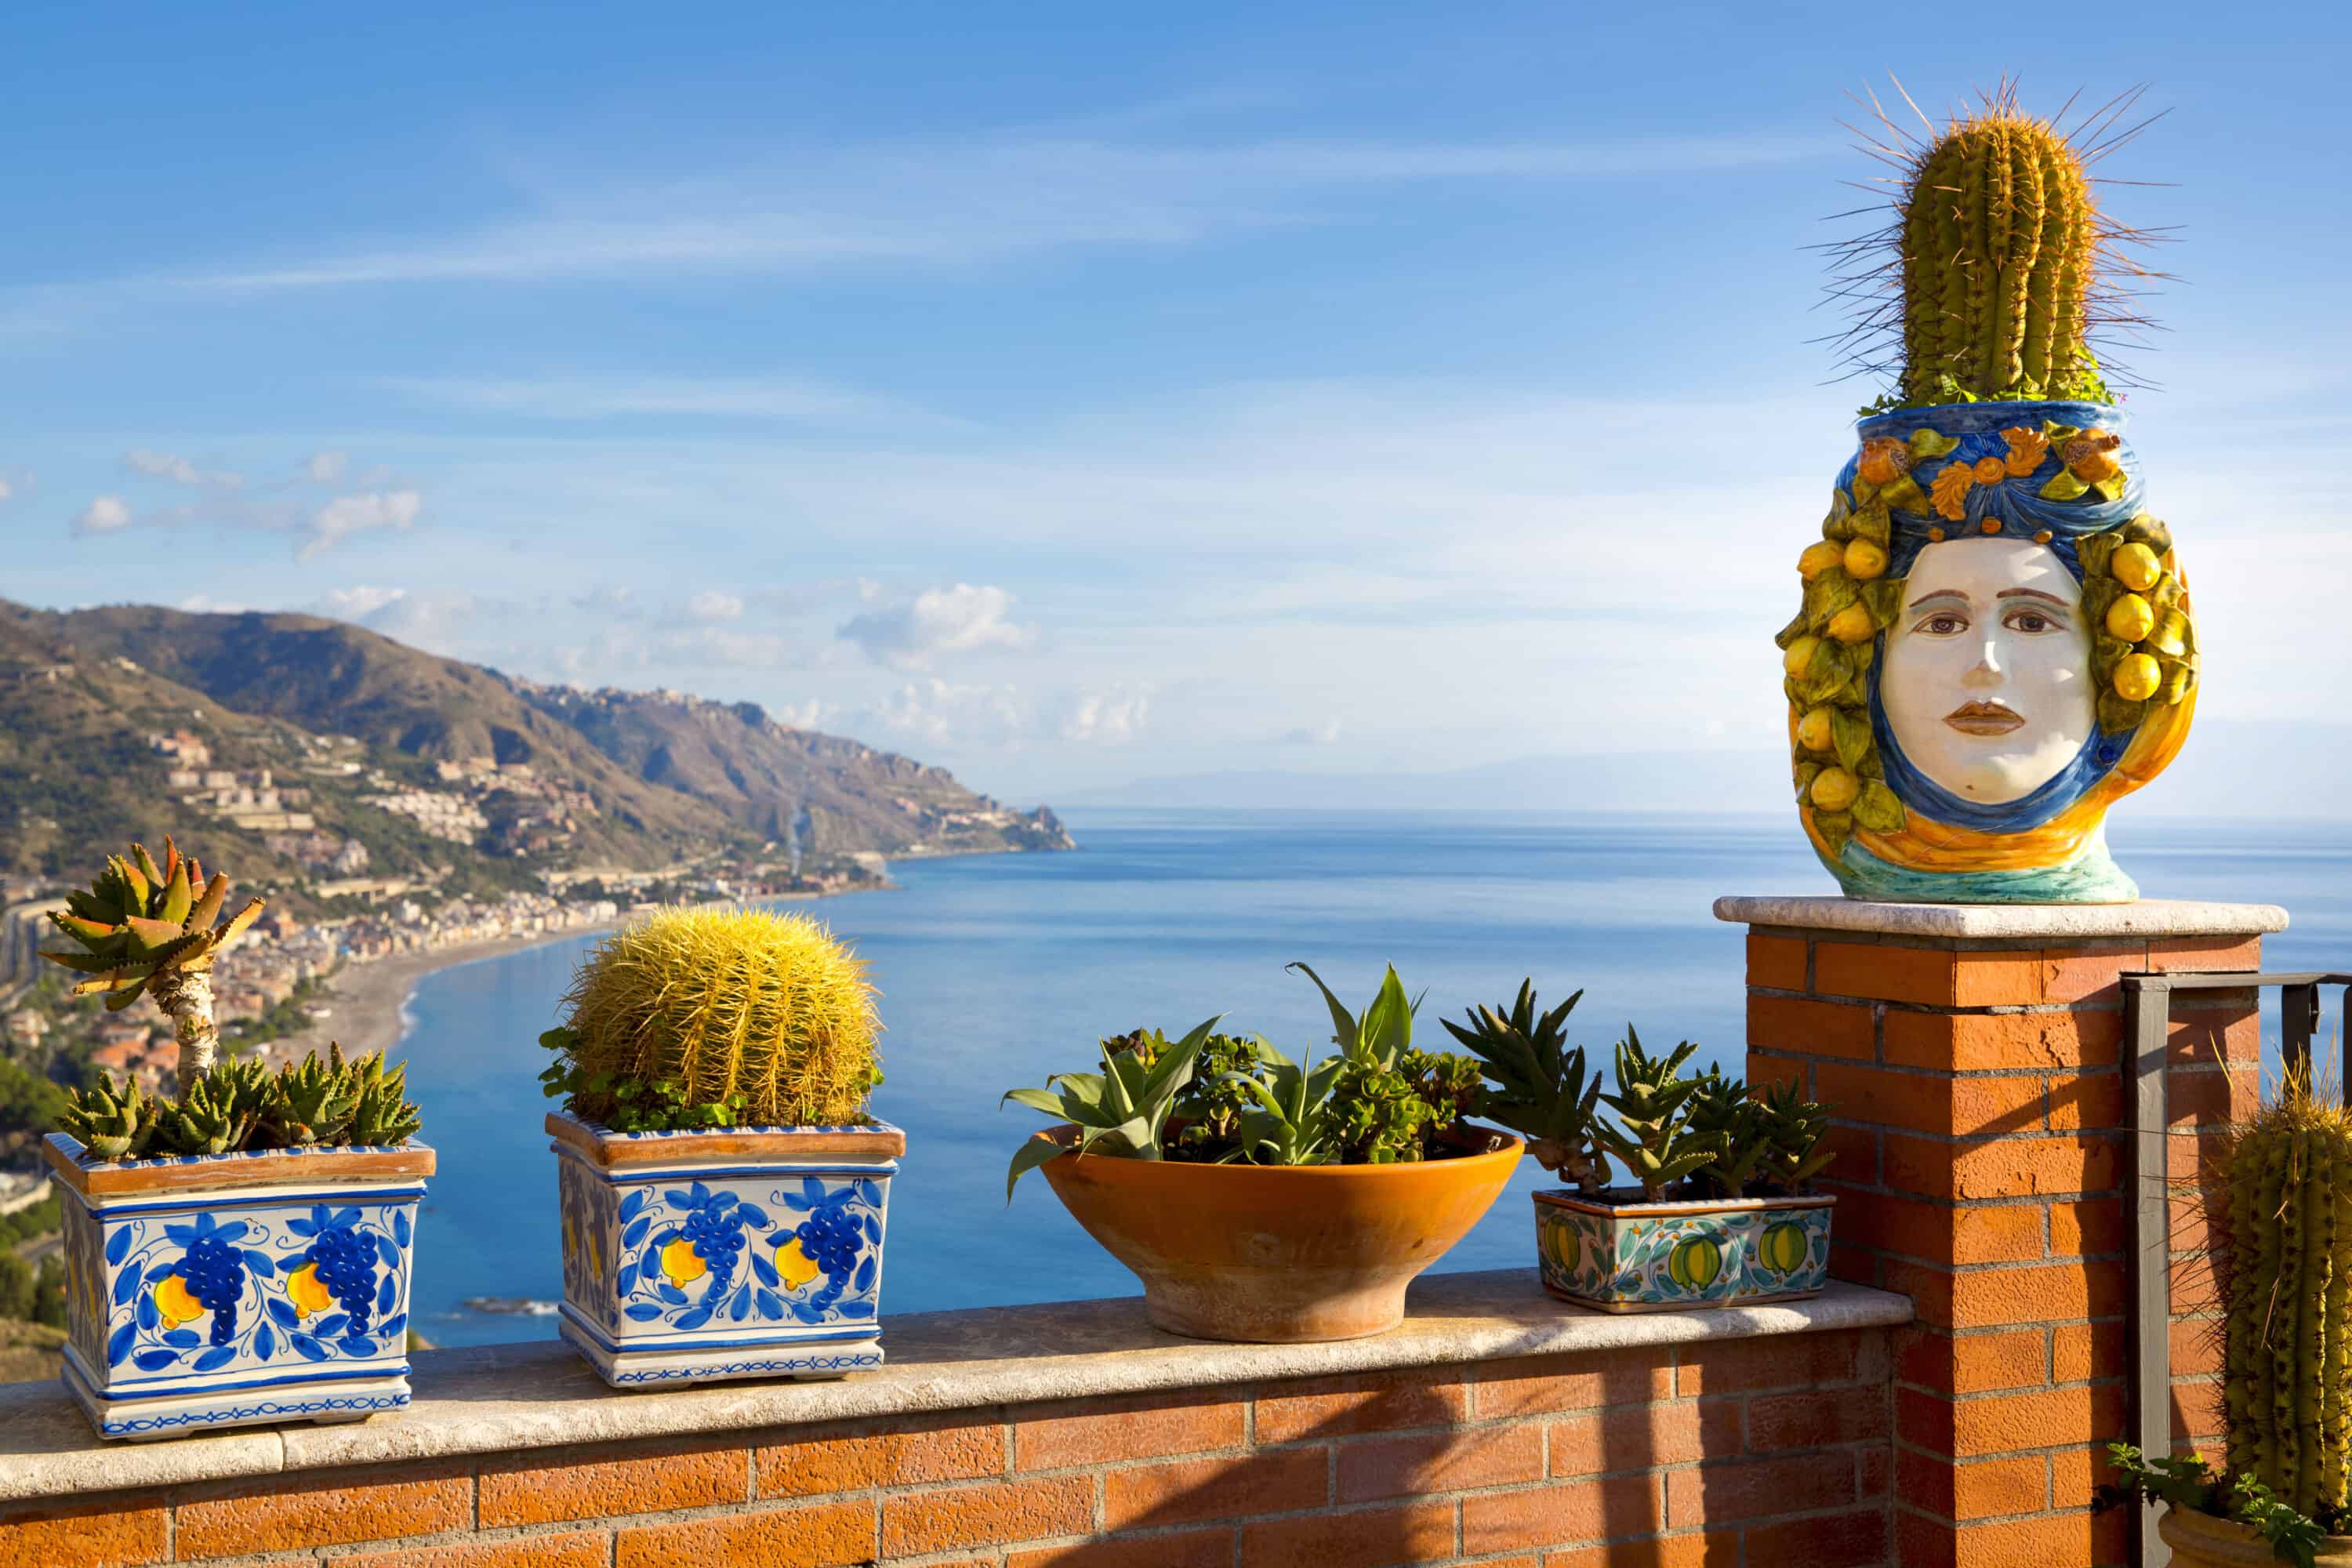 balcony with a face and designed planters looking over the sea in Taormina, Sicily